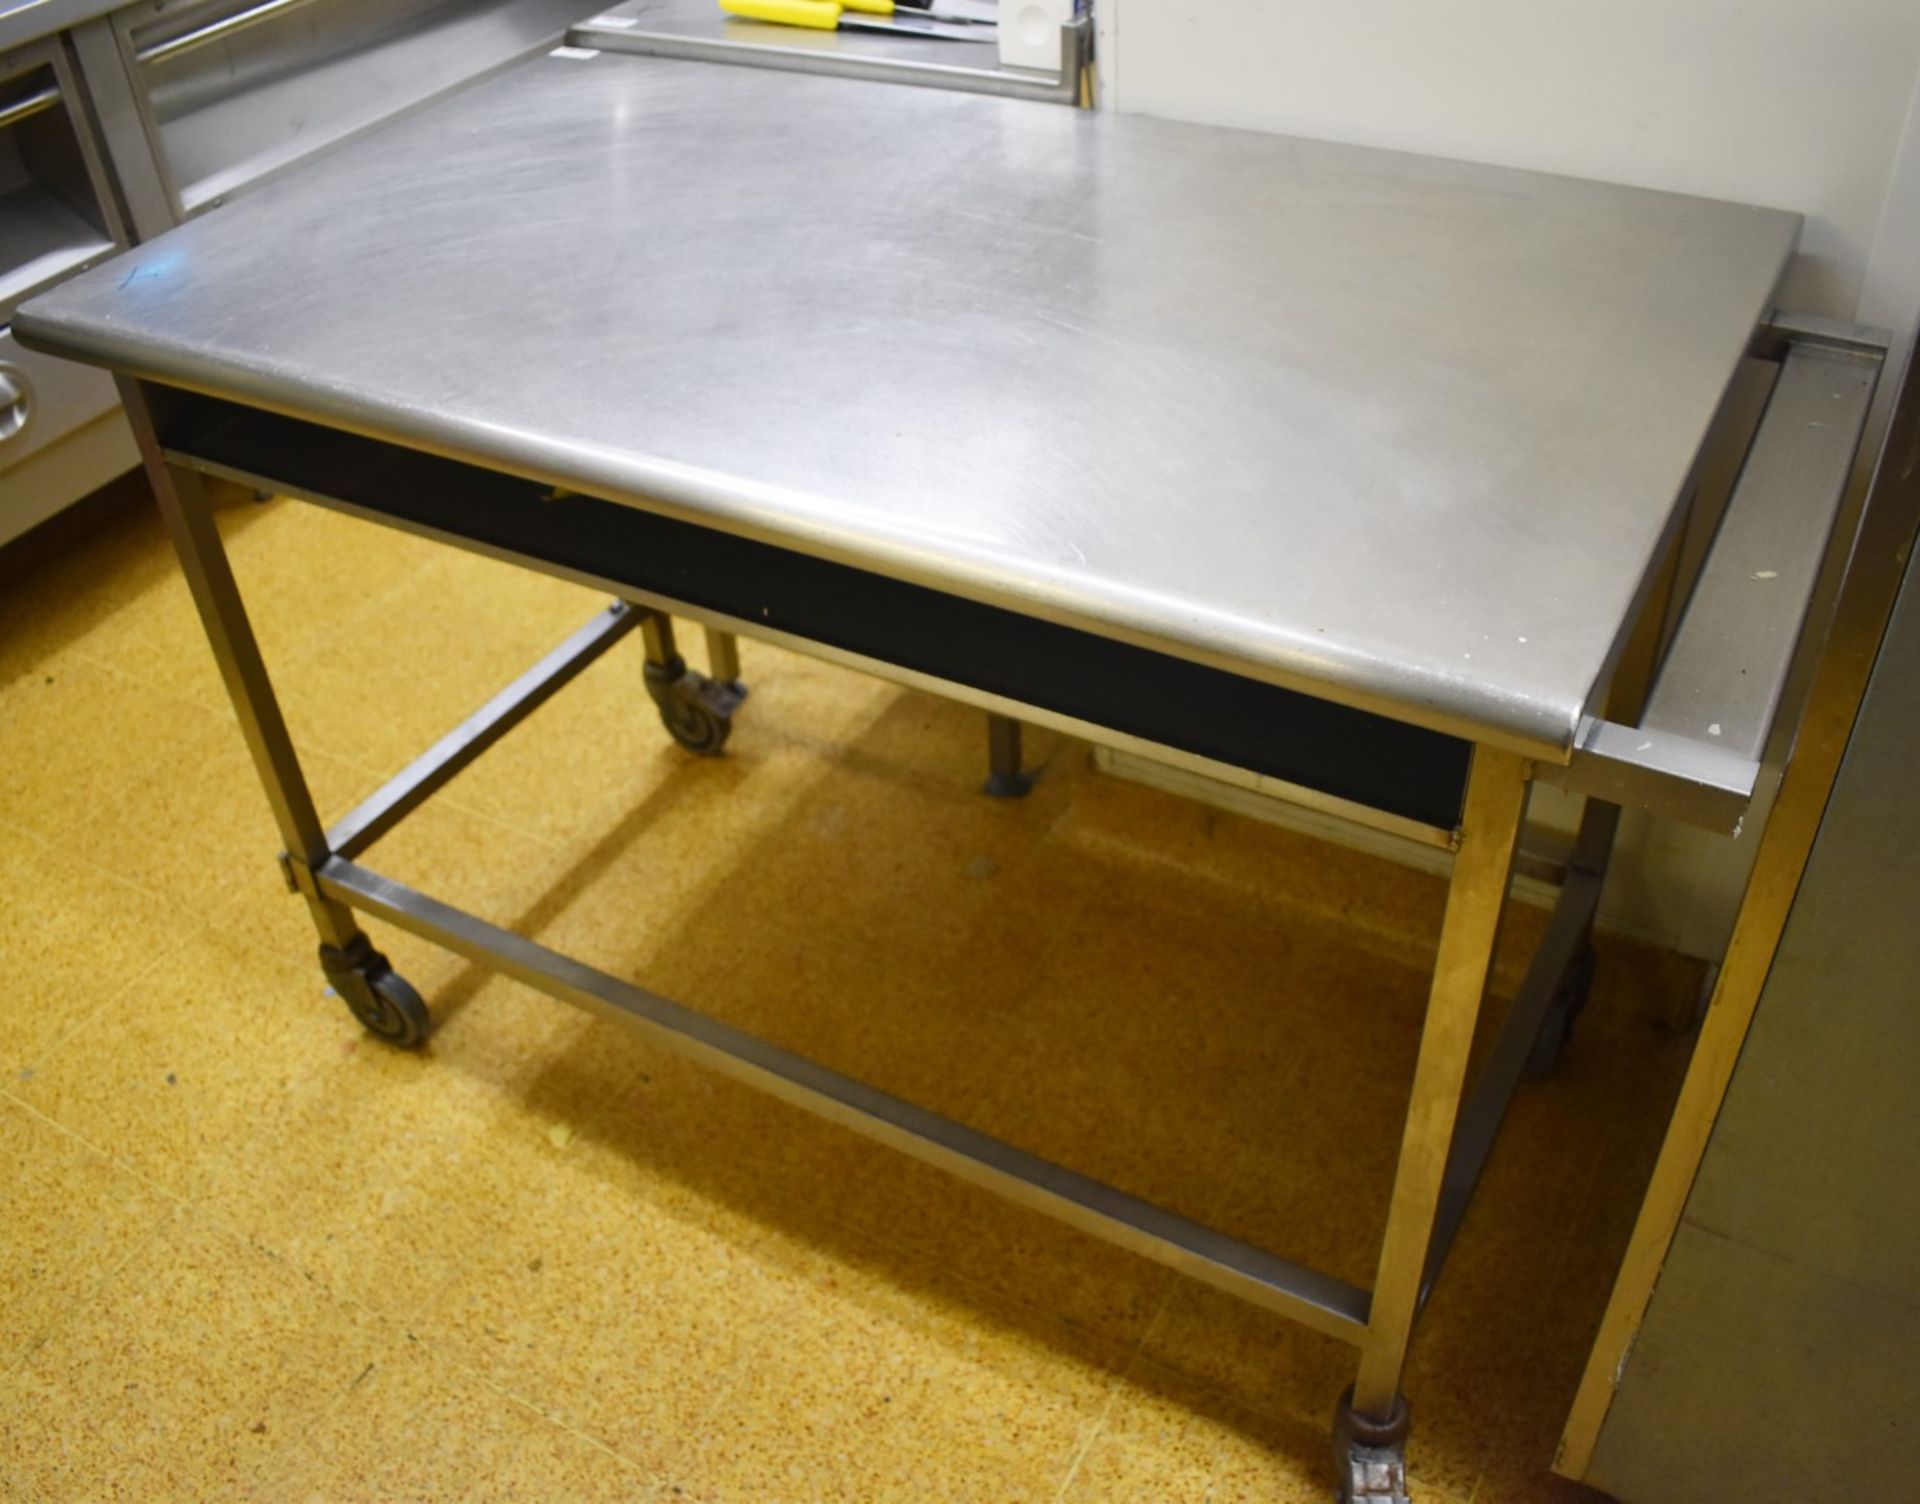 1 x Stainless Steel Mobile Prep Bench With Undershelf and Push/Pull Handle - H87 x W130 x D70